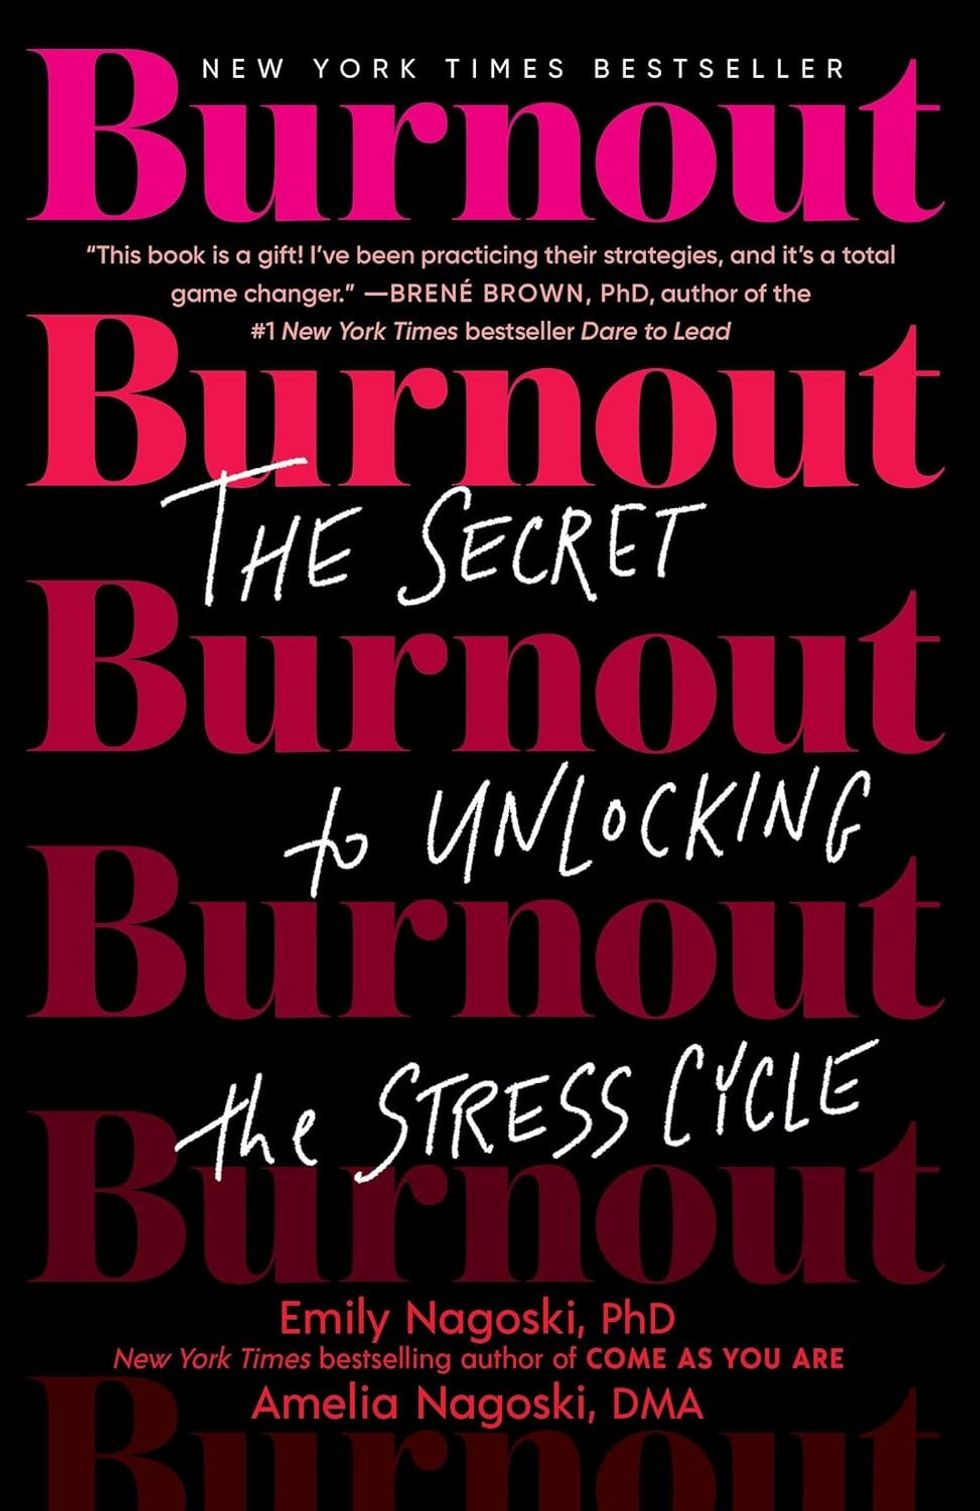 Burnout: The Secret to Unlocking the Stress Cycle by Emily and Amelia Nagoski